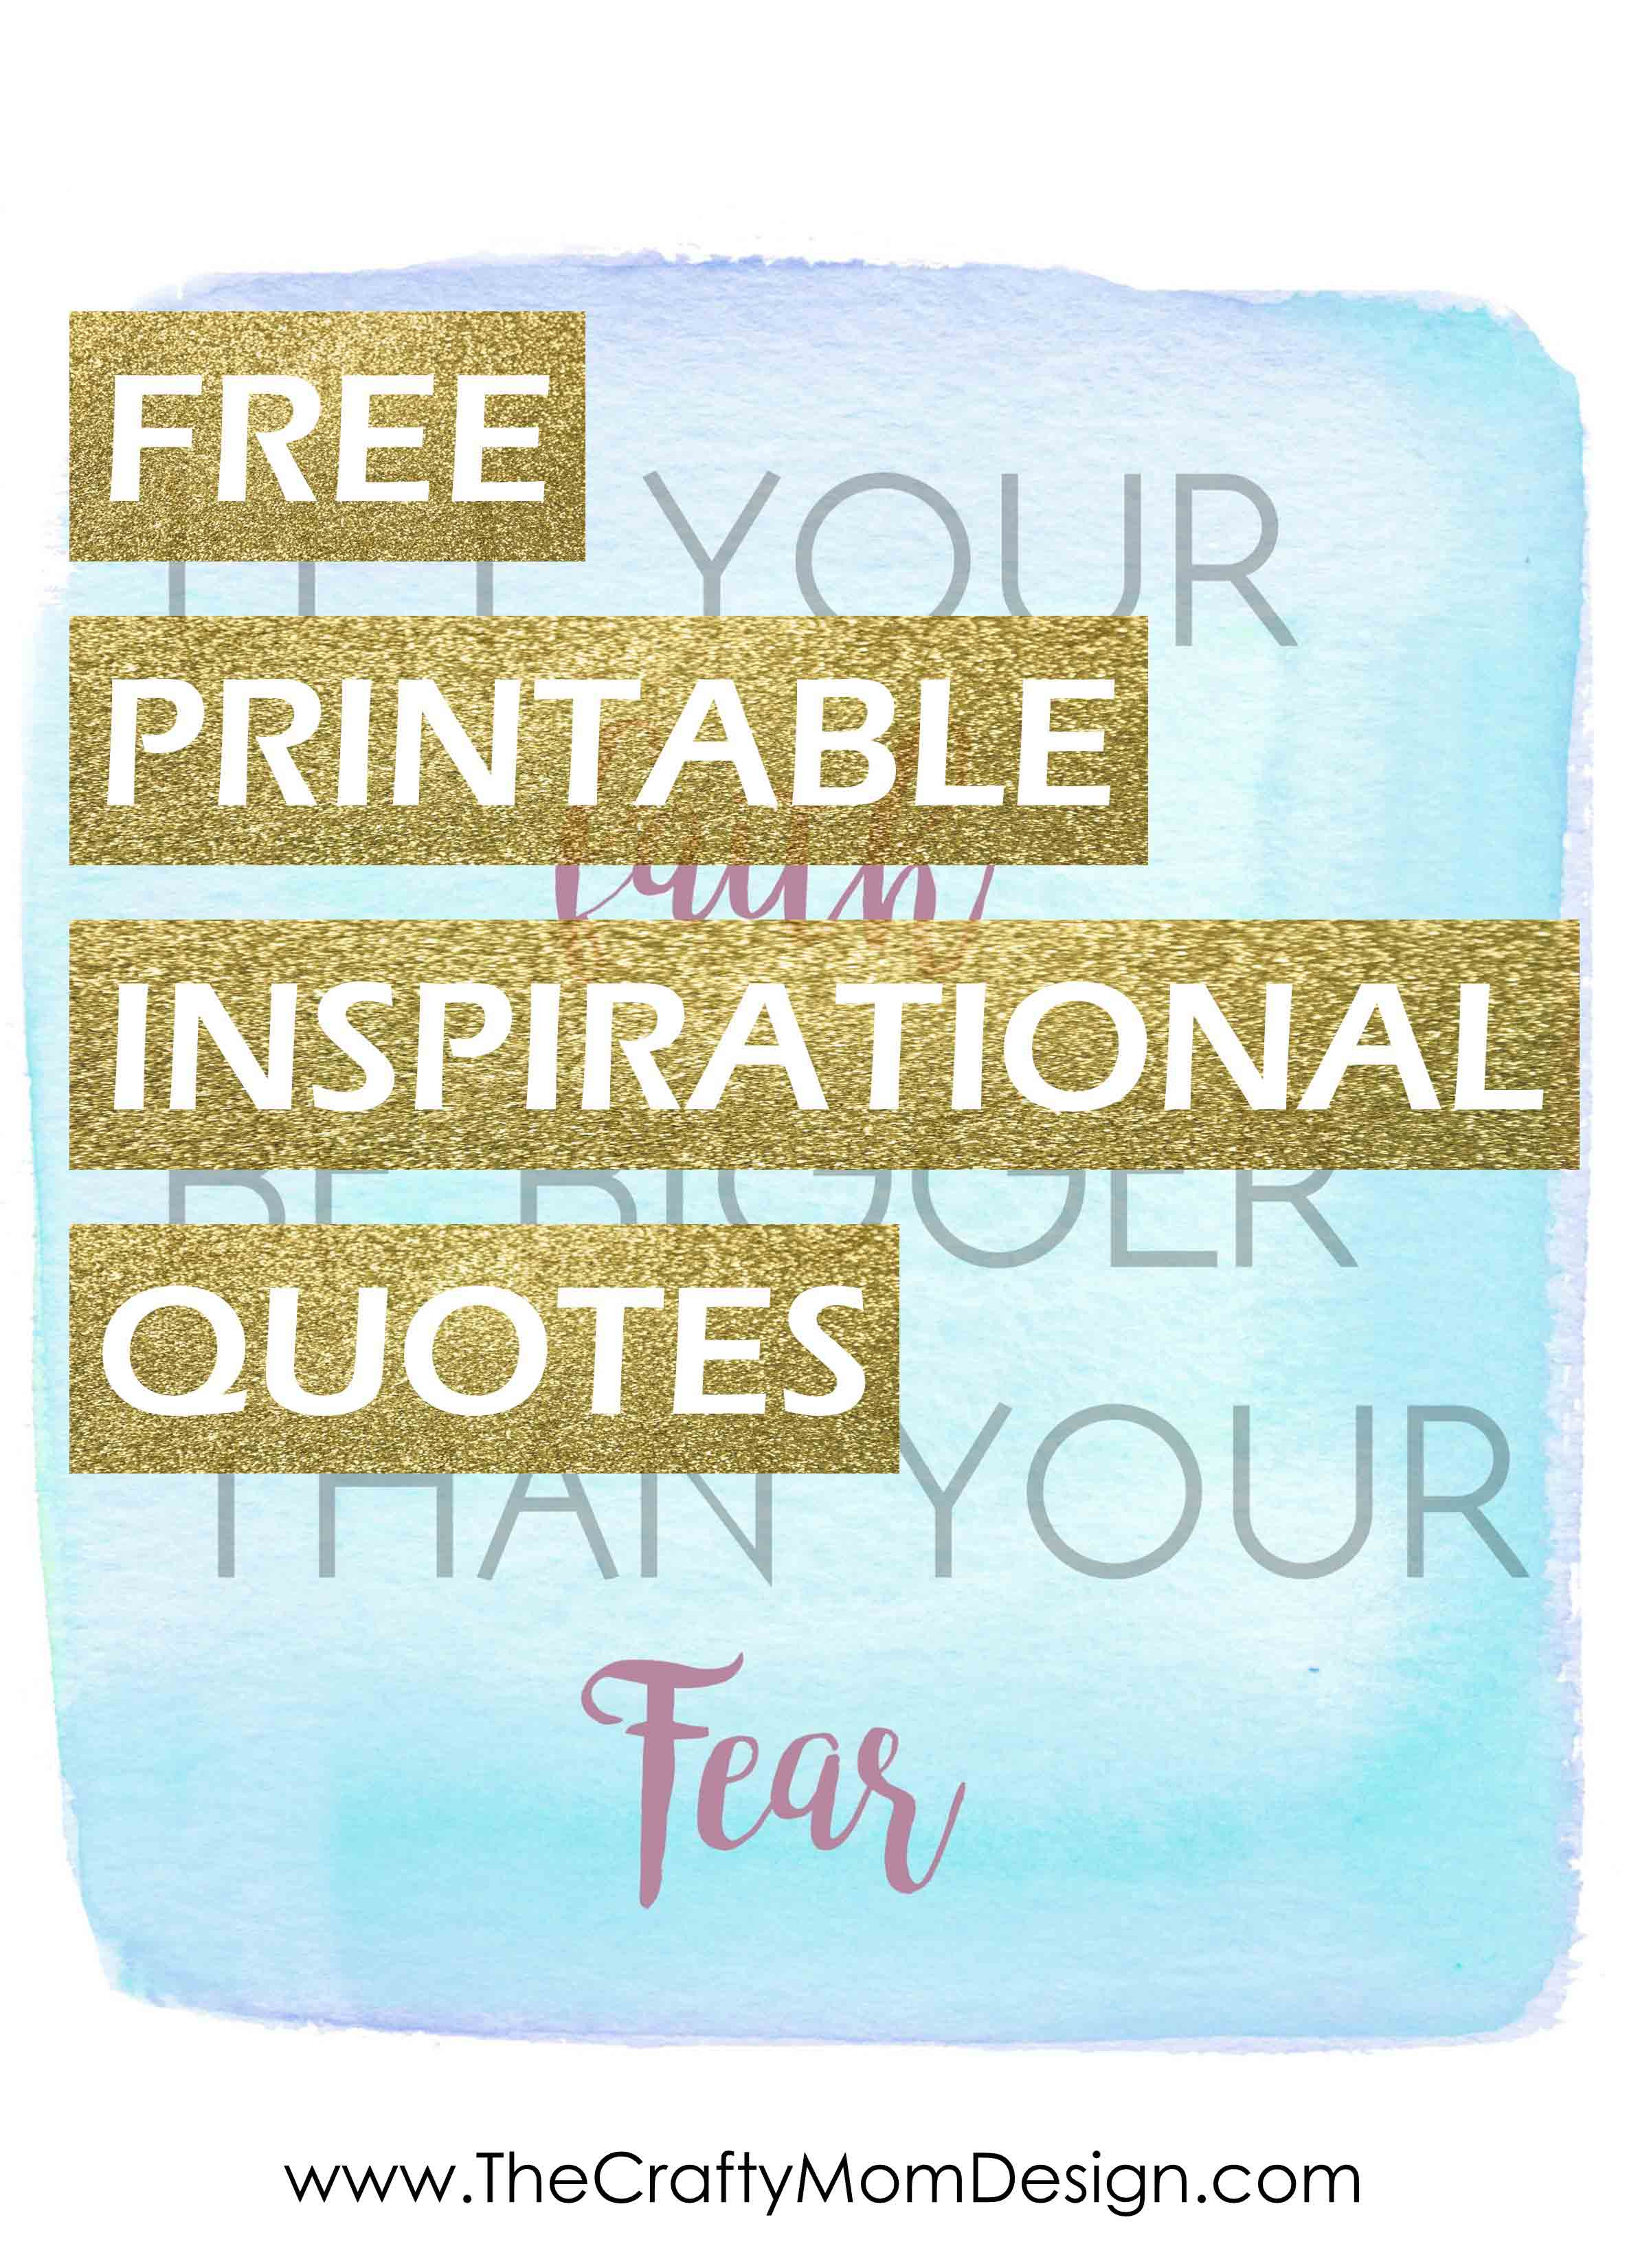 Free Printable Inspirational Quotes • The Crafty Mom Design - Free Printable Quotes Templates